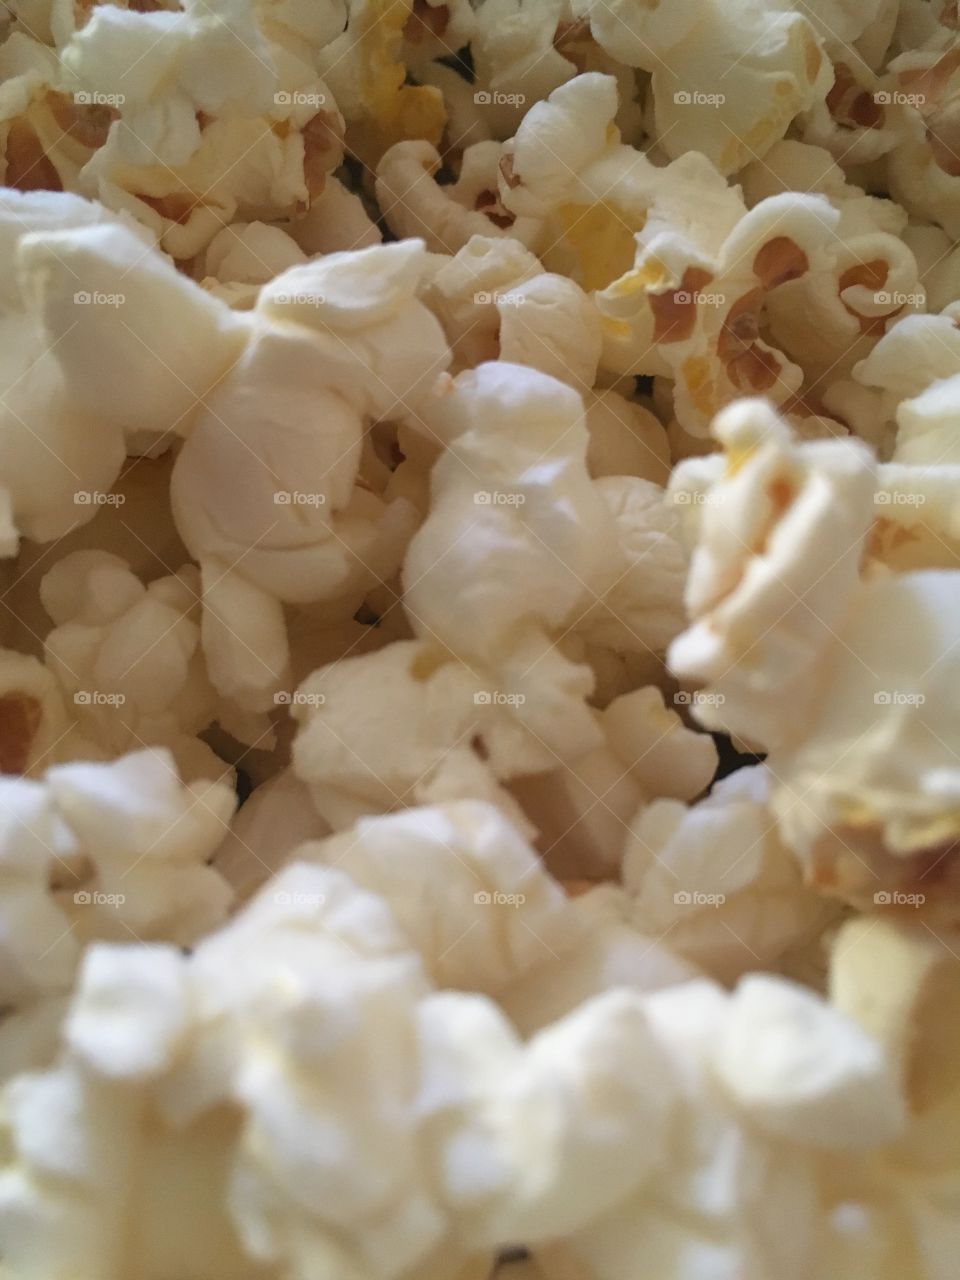 Popcorn kernels up close. Movie time and healthy snack time.